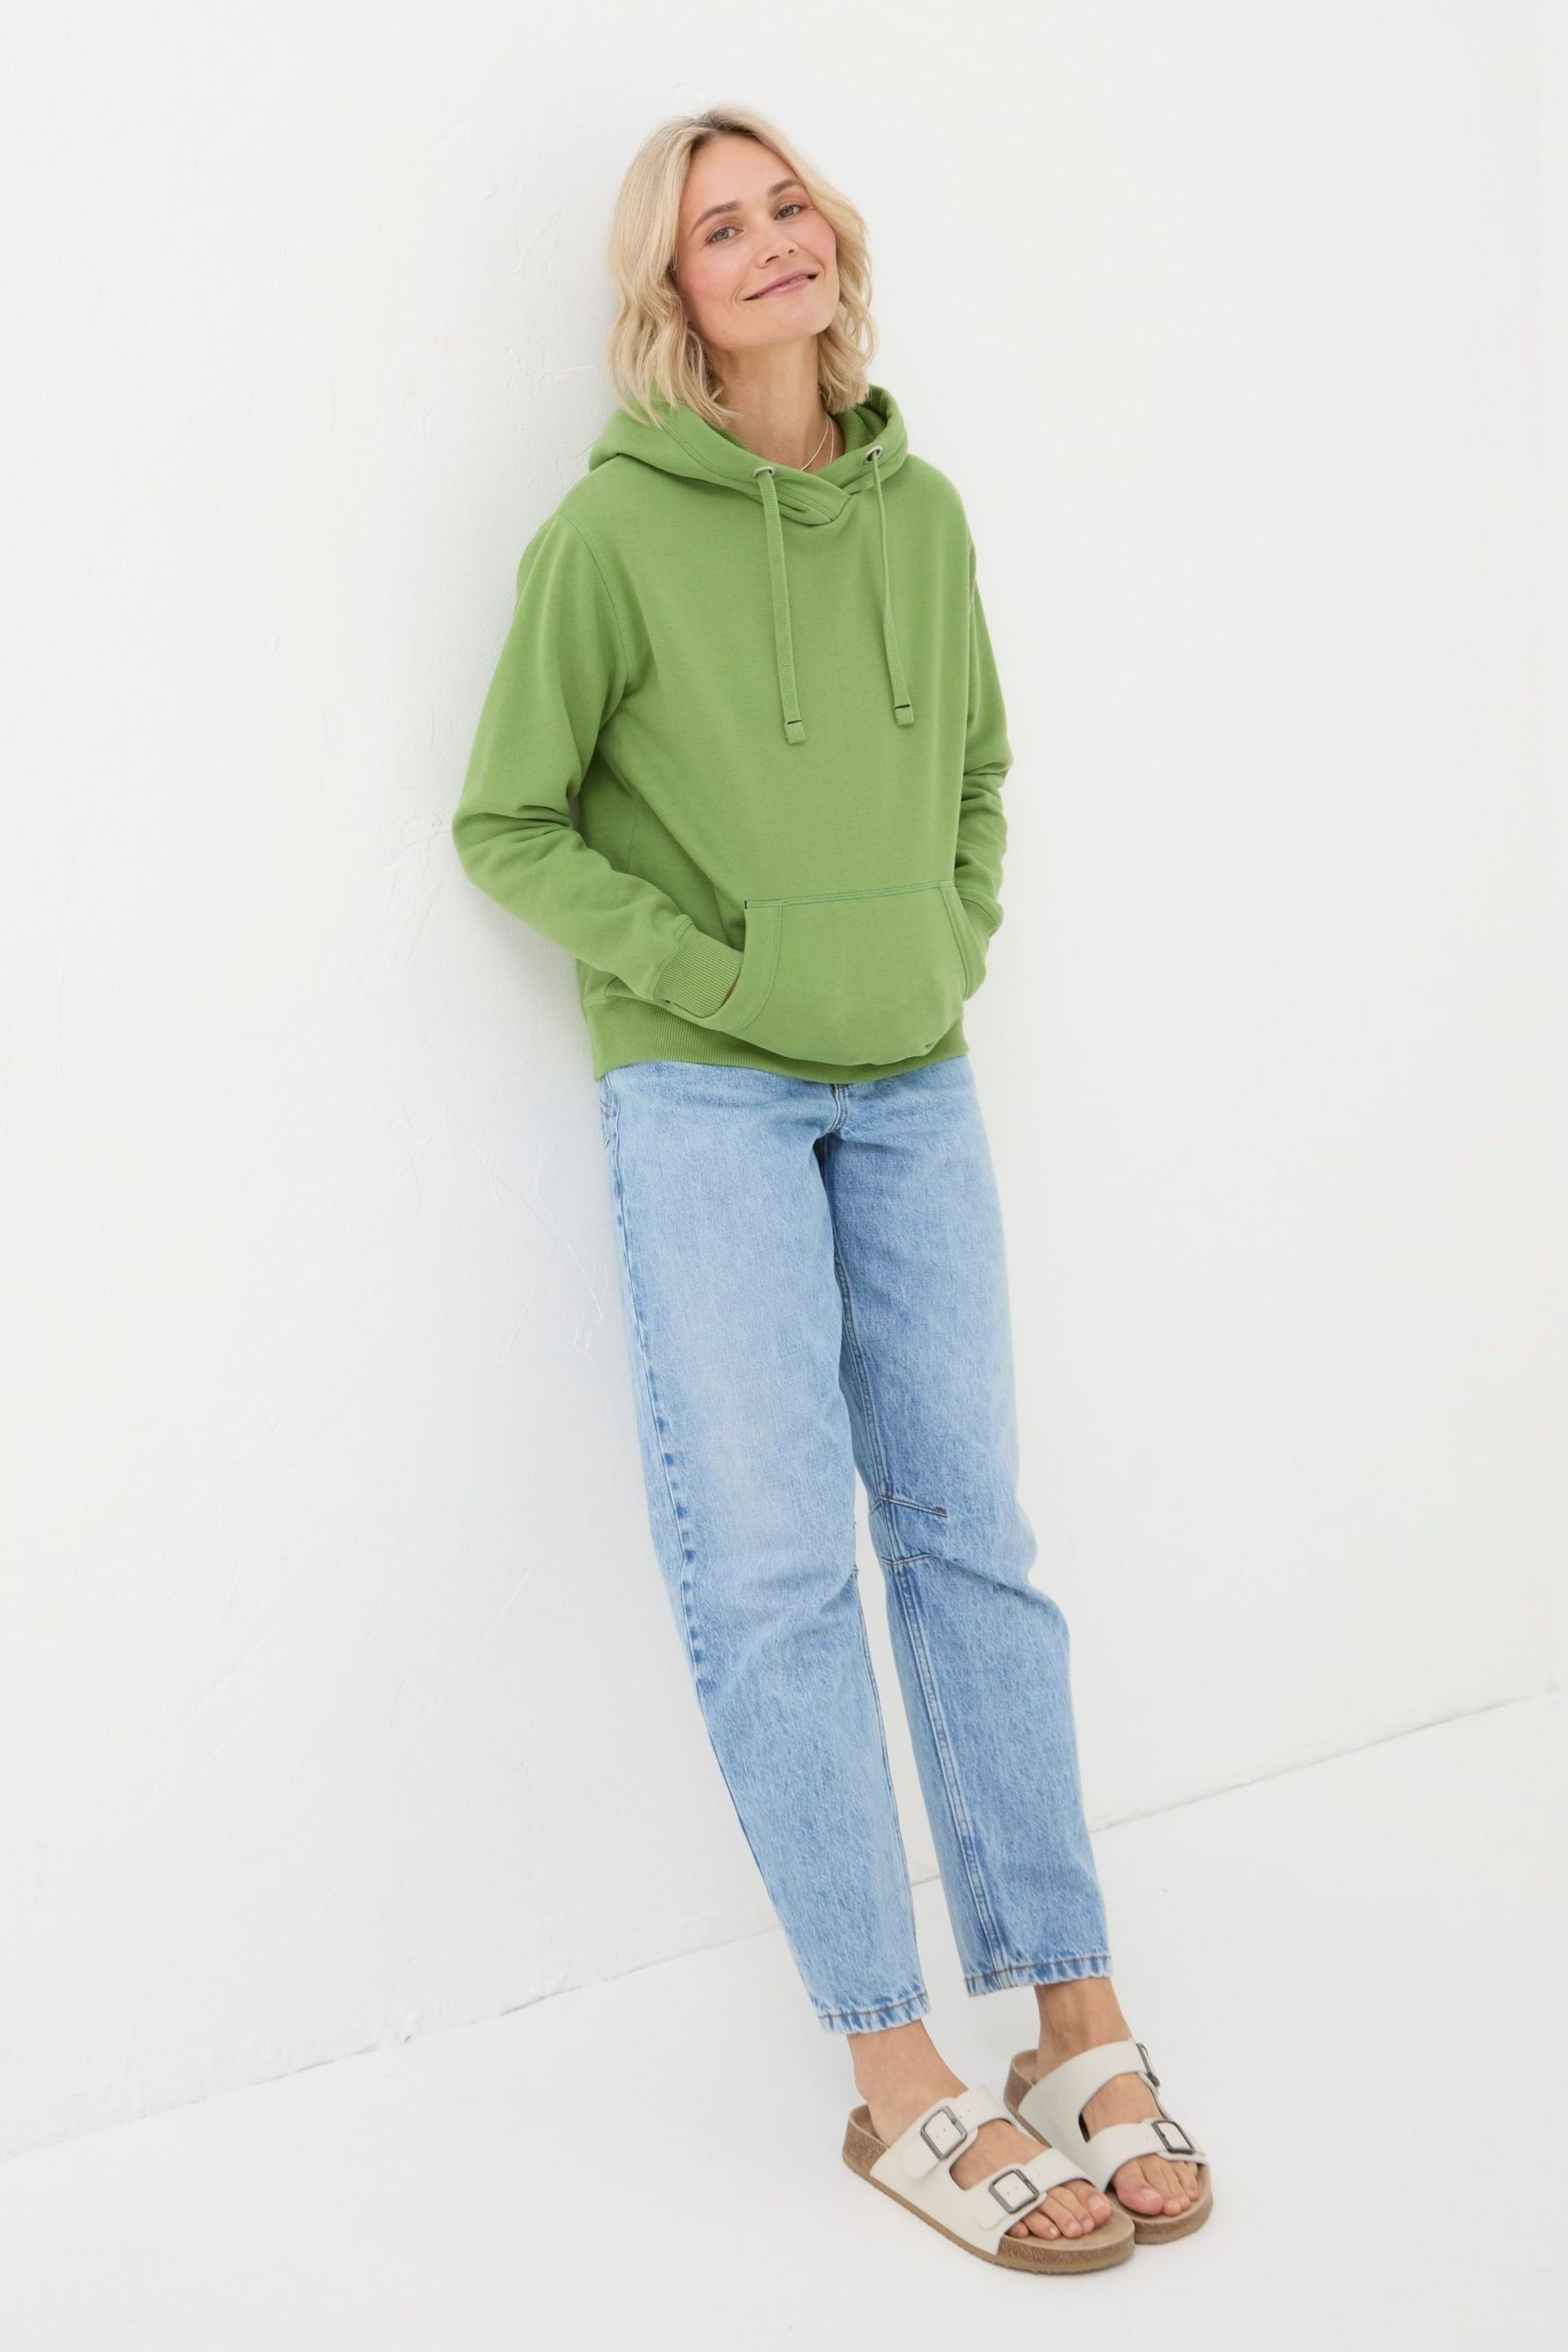 FatFace Green Izzy Overhead Hoodie - Image 2 of 4